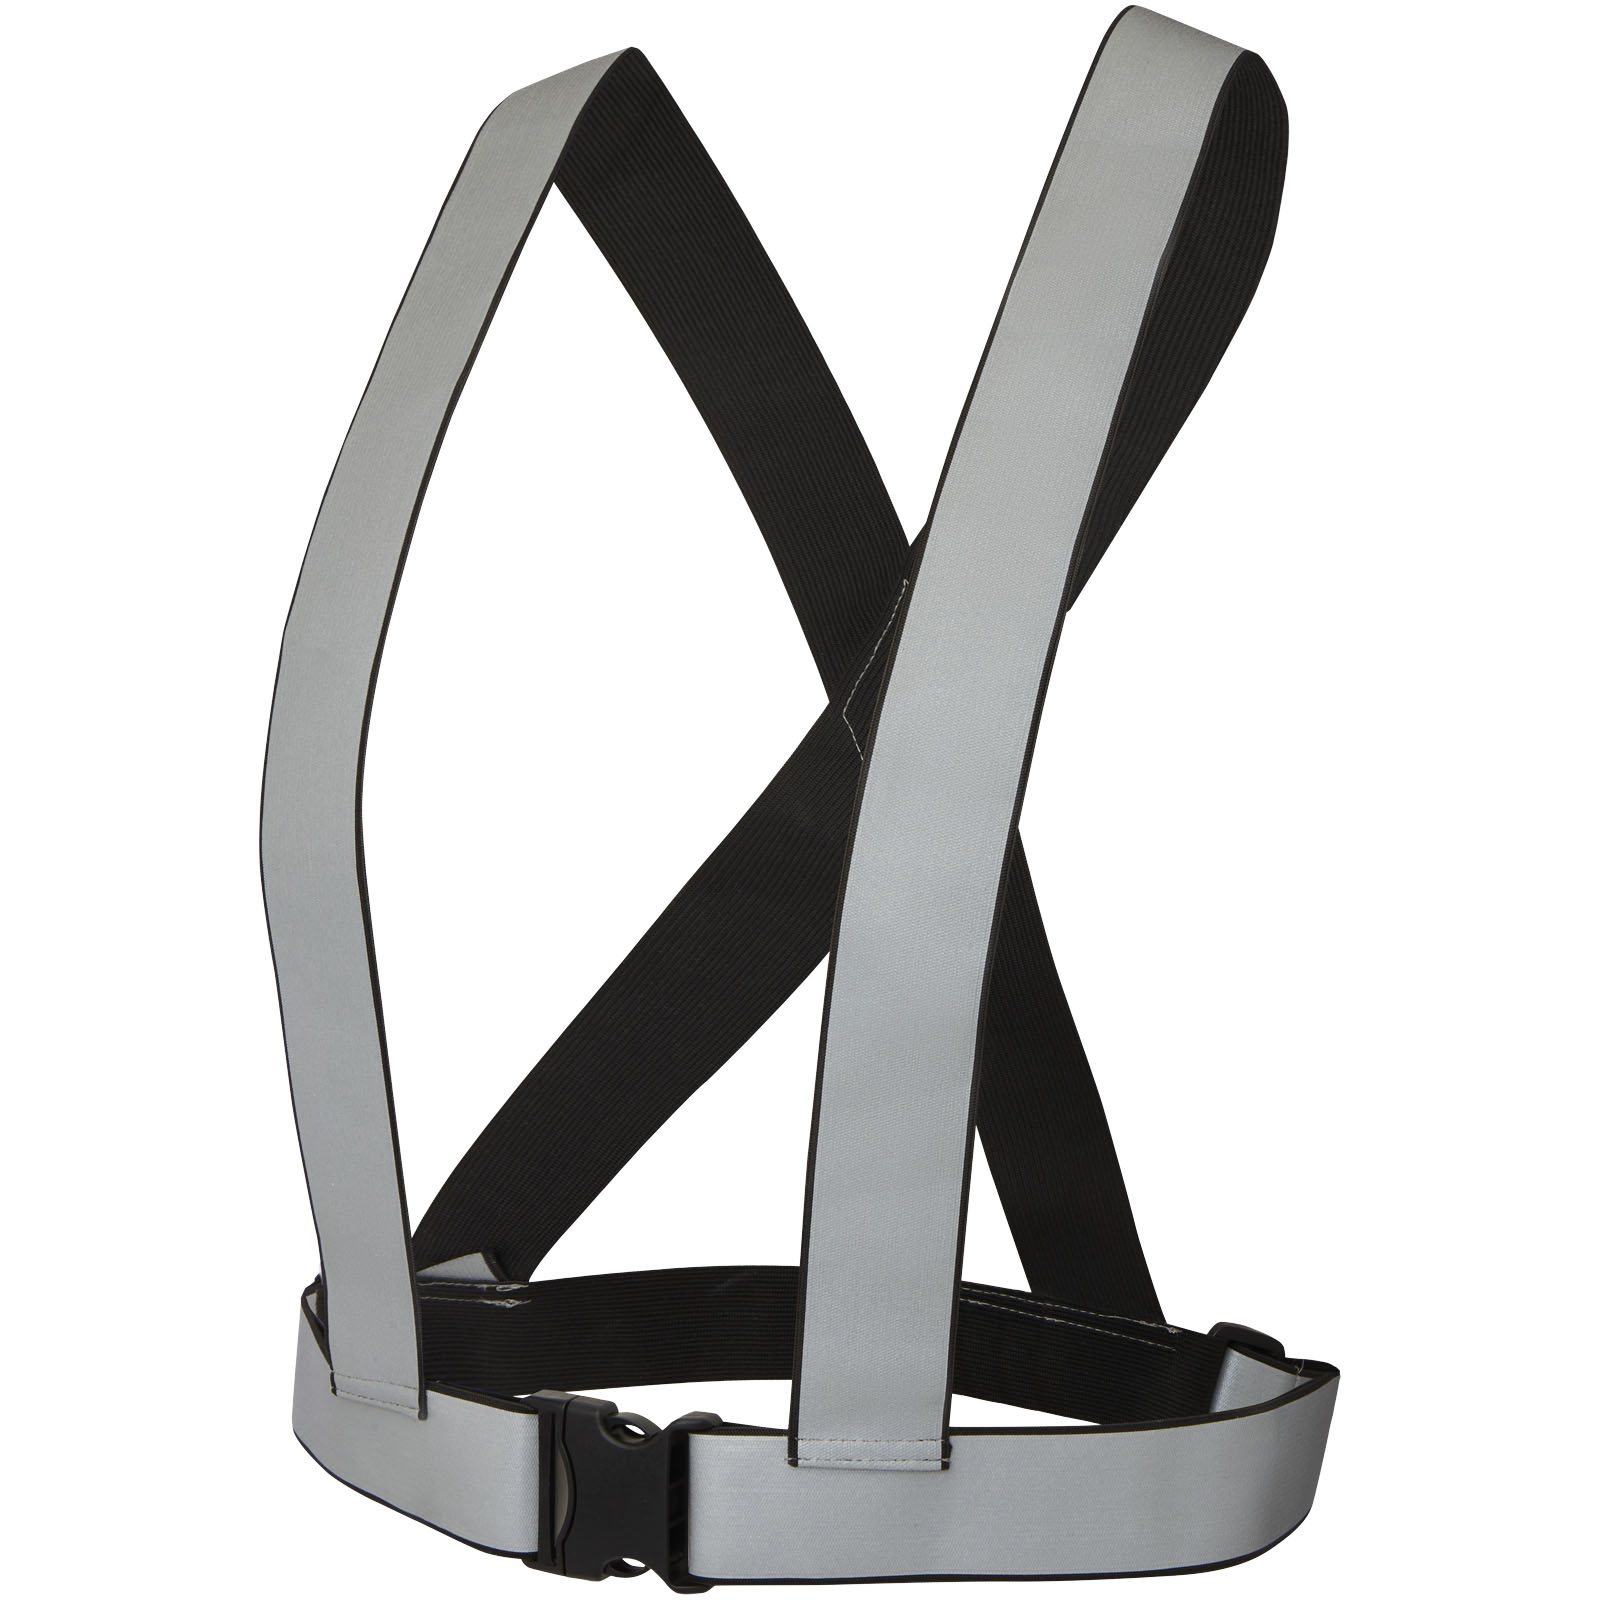 Tools & Car Accessories - RFX™ Desiree reflective safety harness and west